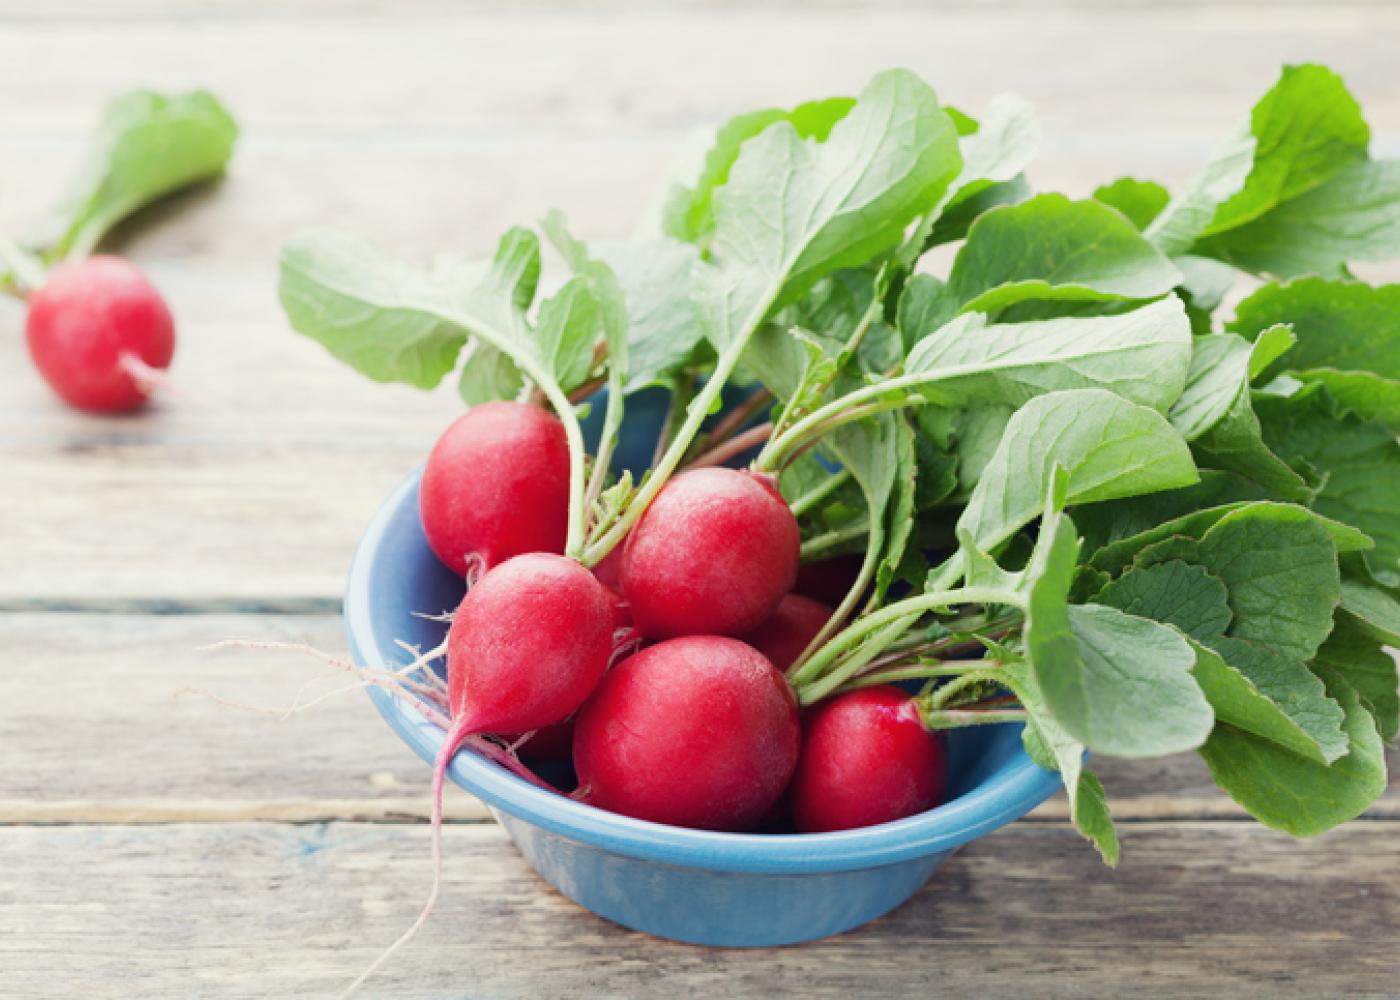 radishes with their green tops in a bowl